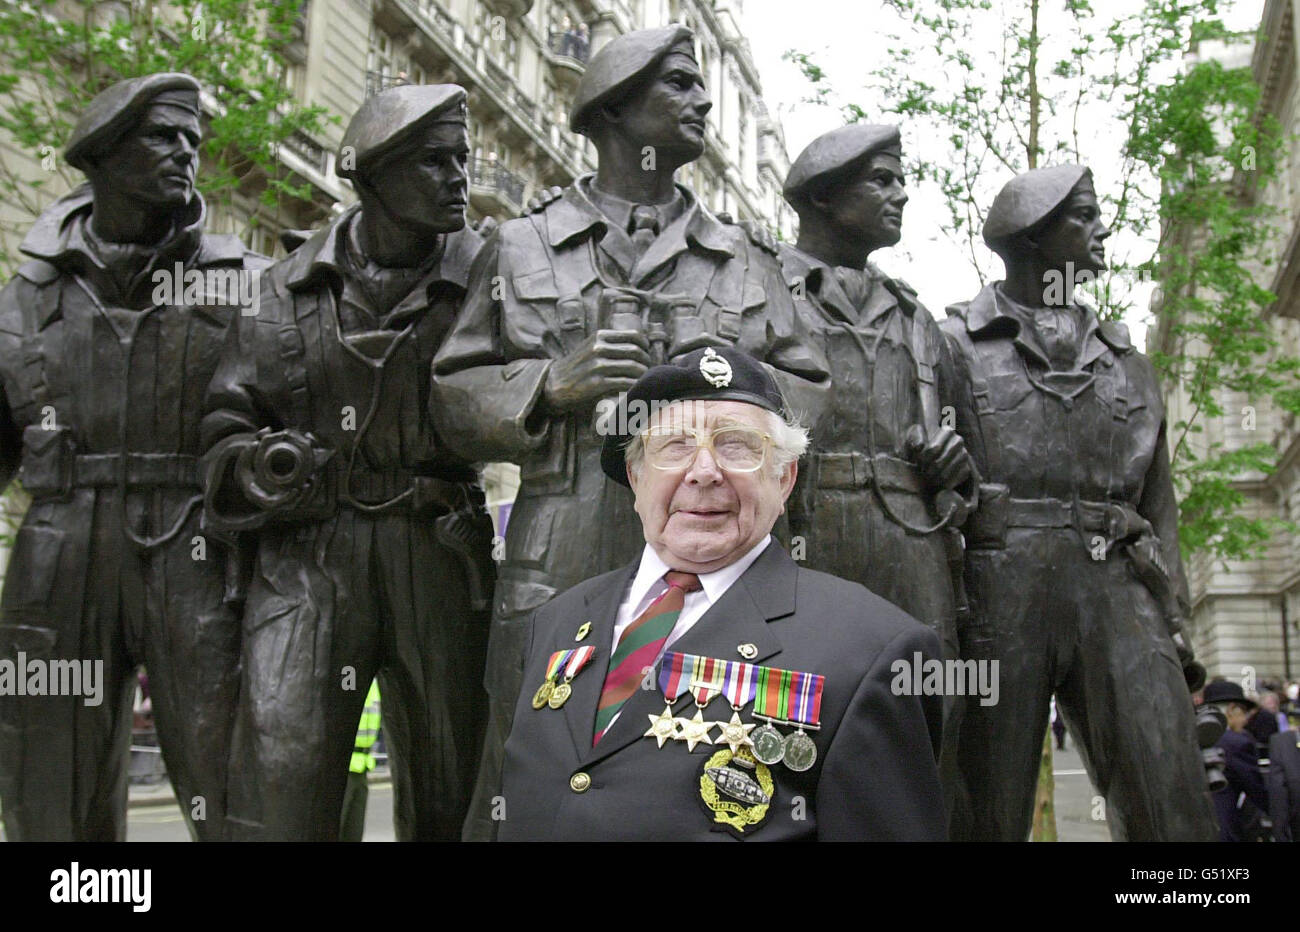 Mr Bill Bourne, 78, who served in tanks in the Second World War in North Africa, stands in front of a bronze statue of a five man tank crew, which Queen Elizabeth II unveiled in Whitehall Place, London. * The memorial statue is dedicated to the men of the Royal Tank regiment, which was formed 100 years ago on 13/06/00. The Queen was escorted from Buckingham Palace to the statue by a 1924 Rolls-Royce armoured car. Stock Photo